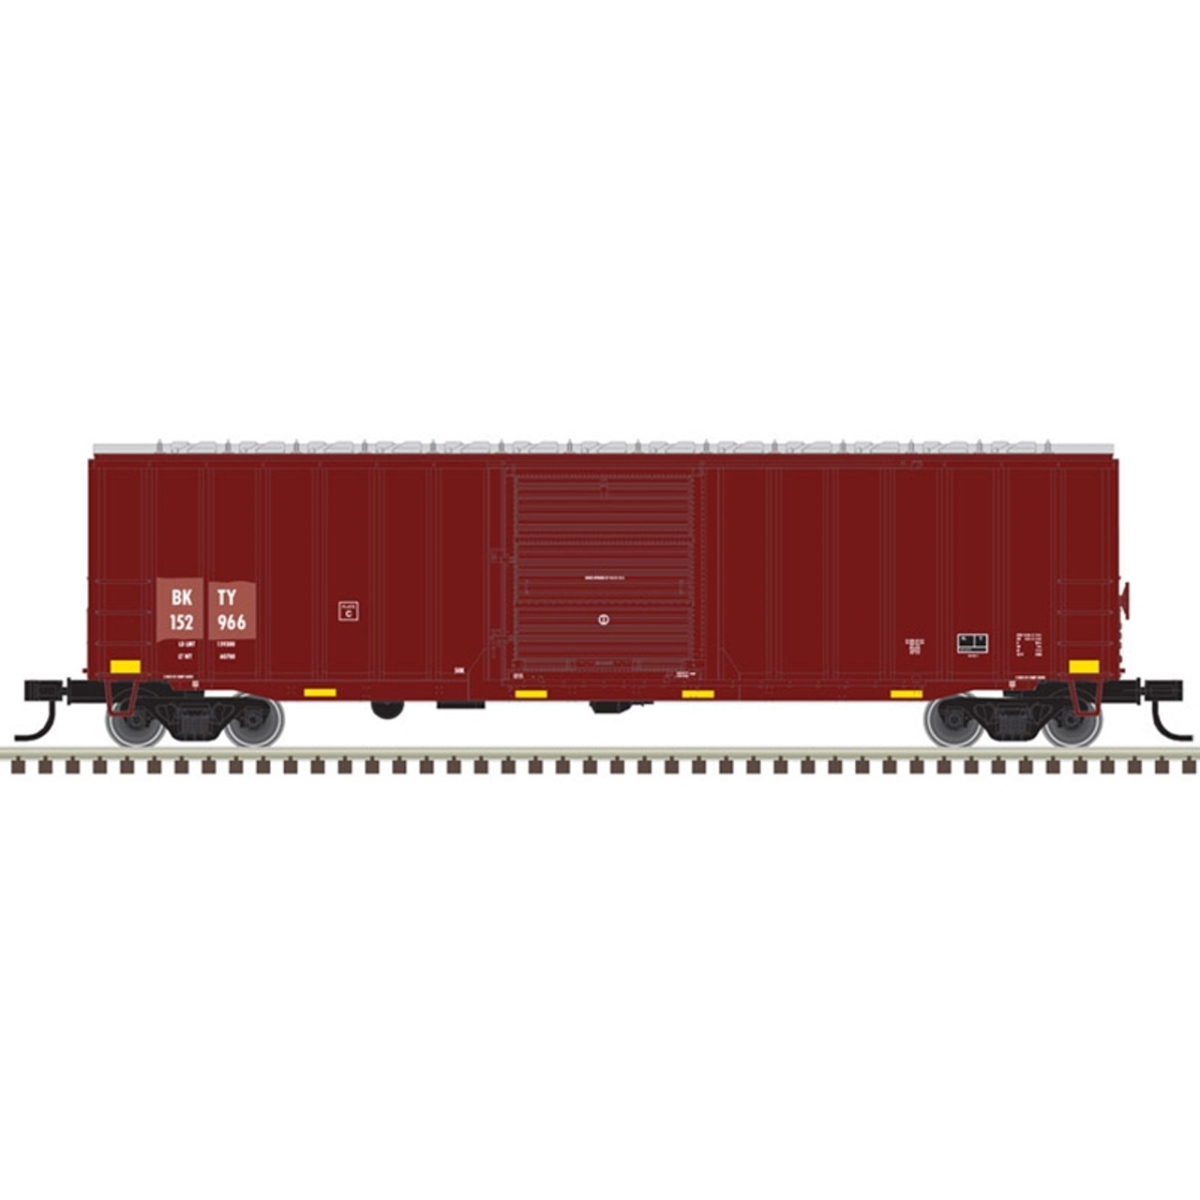 Picture of Atlas Model Railroad ATL20006709 50 ft.6 in. HO Scale Union Pacific Box Car for No.152966